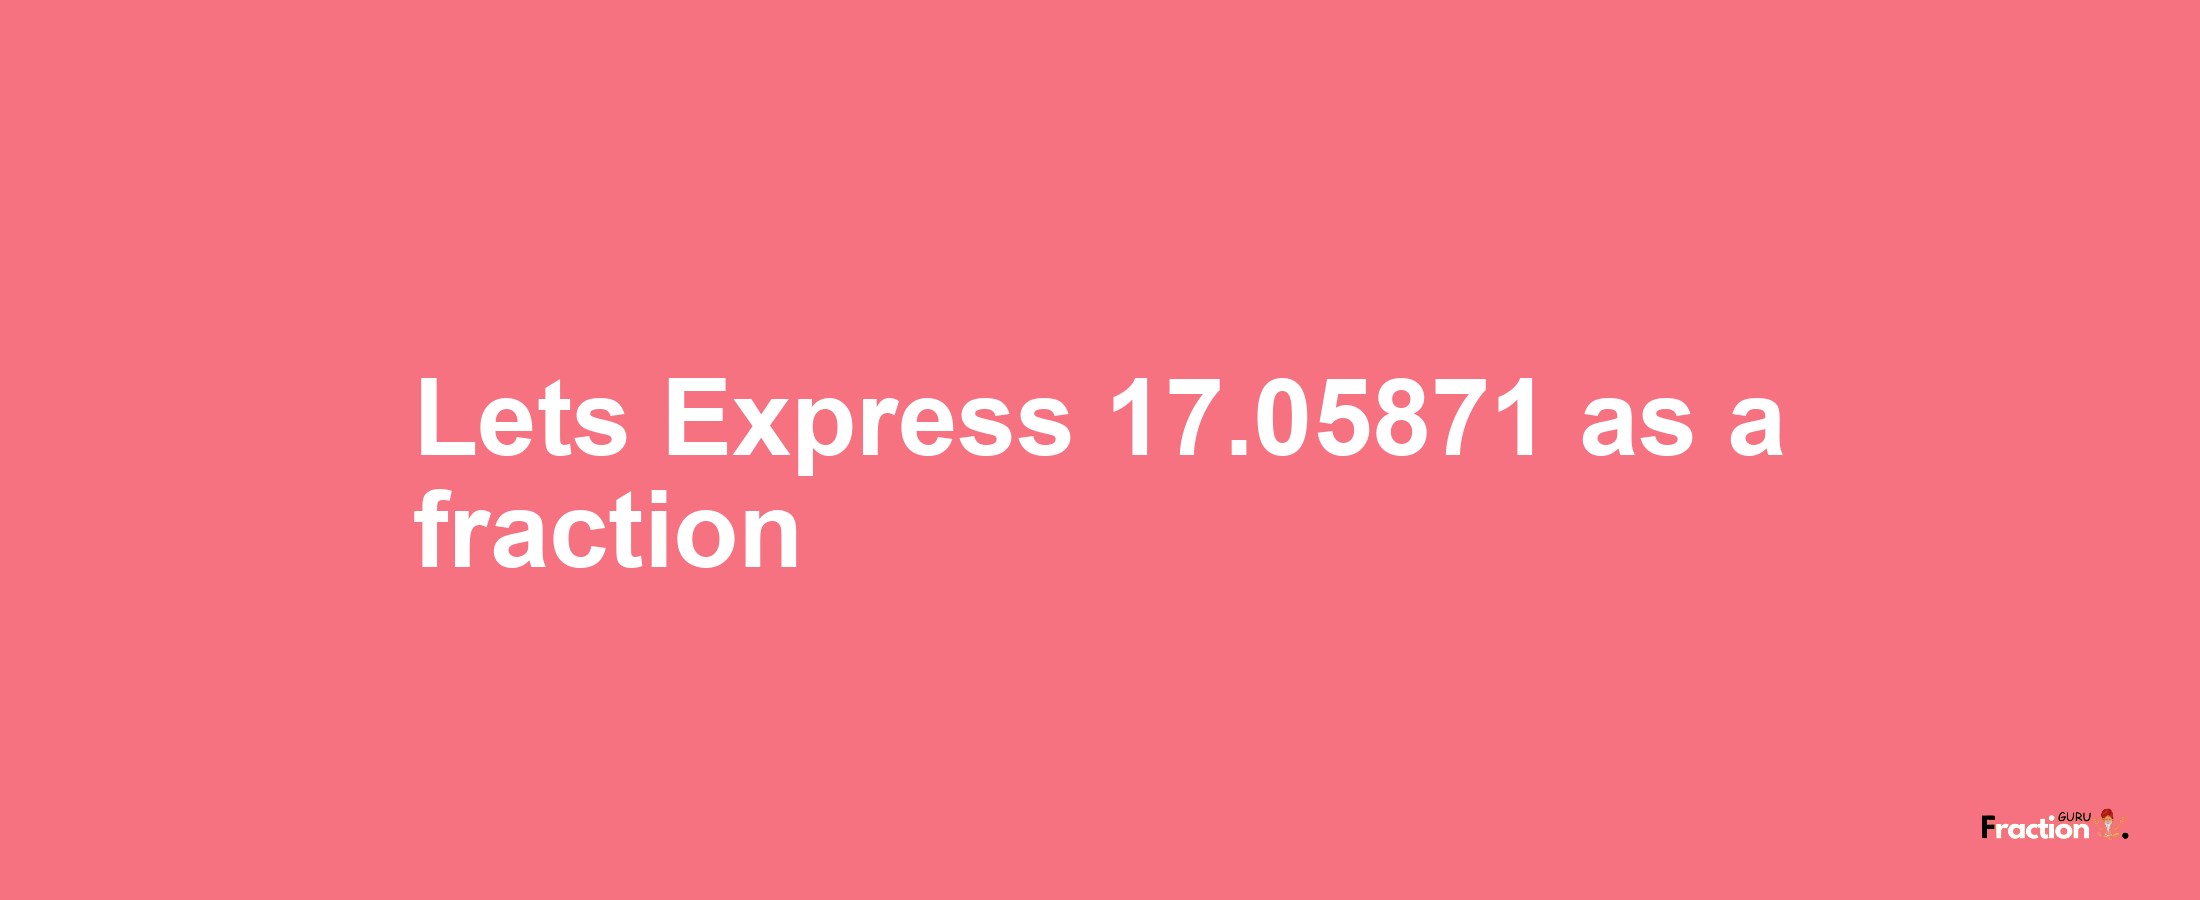 Lets Express 17.05871 as afraction